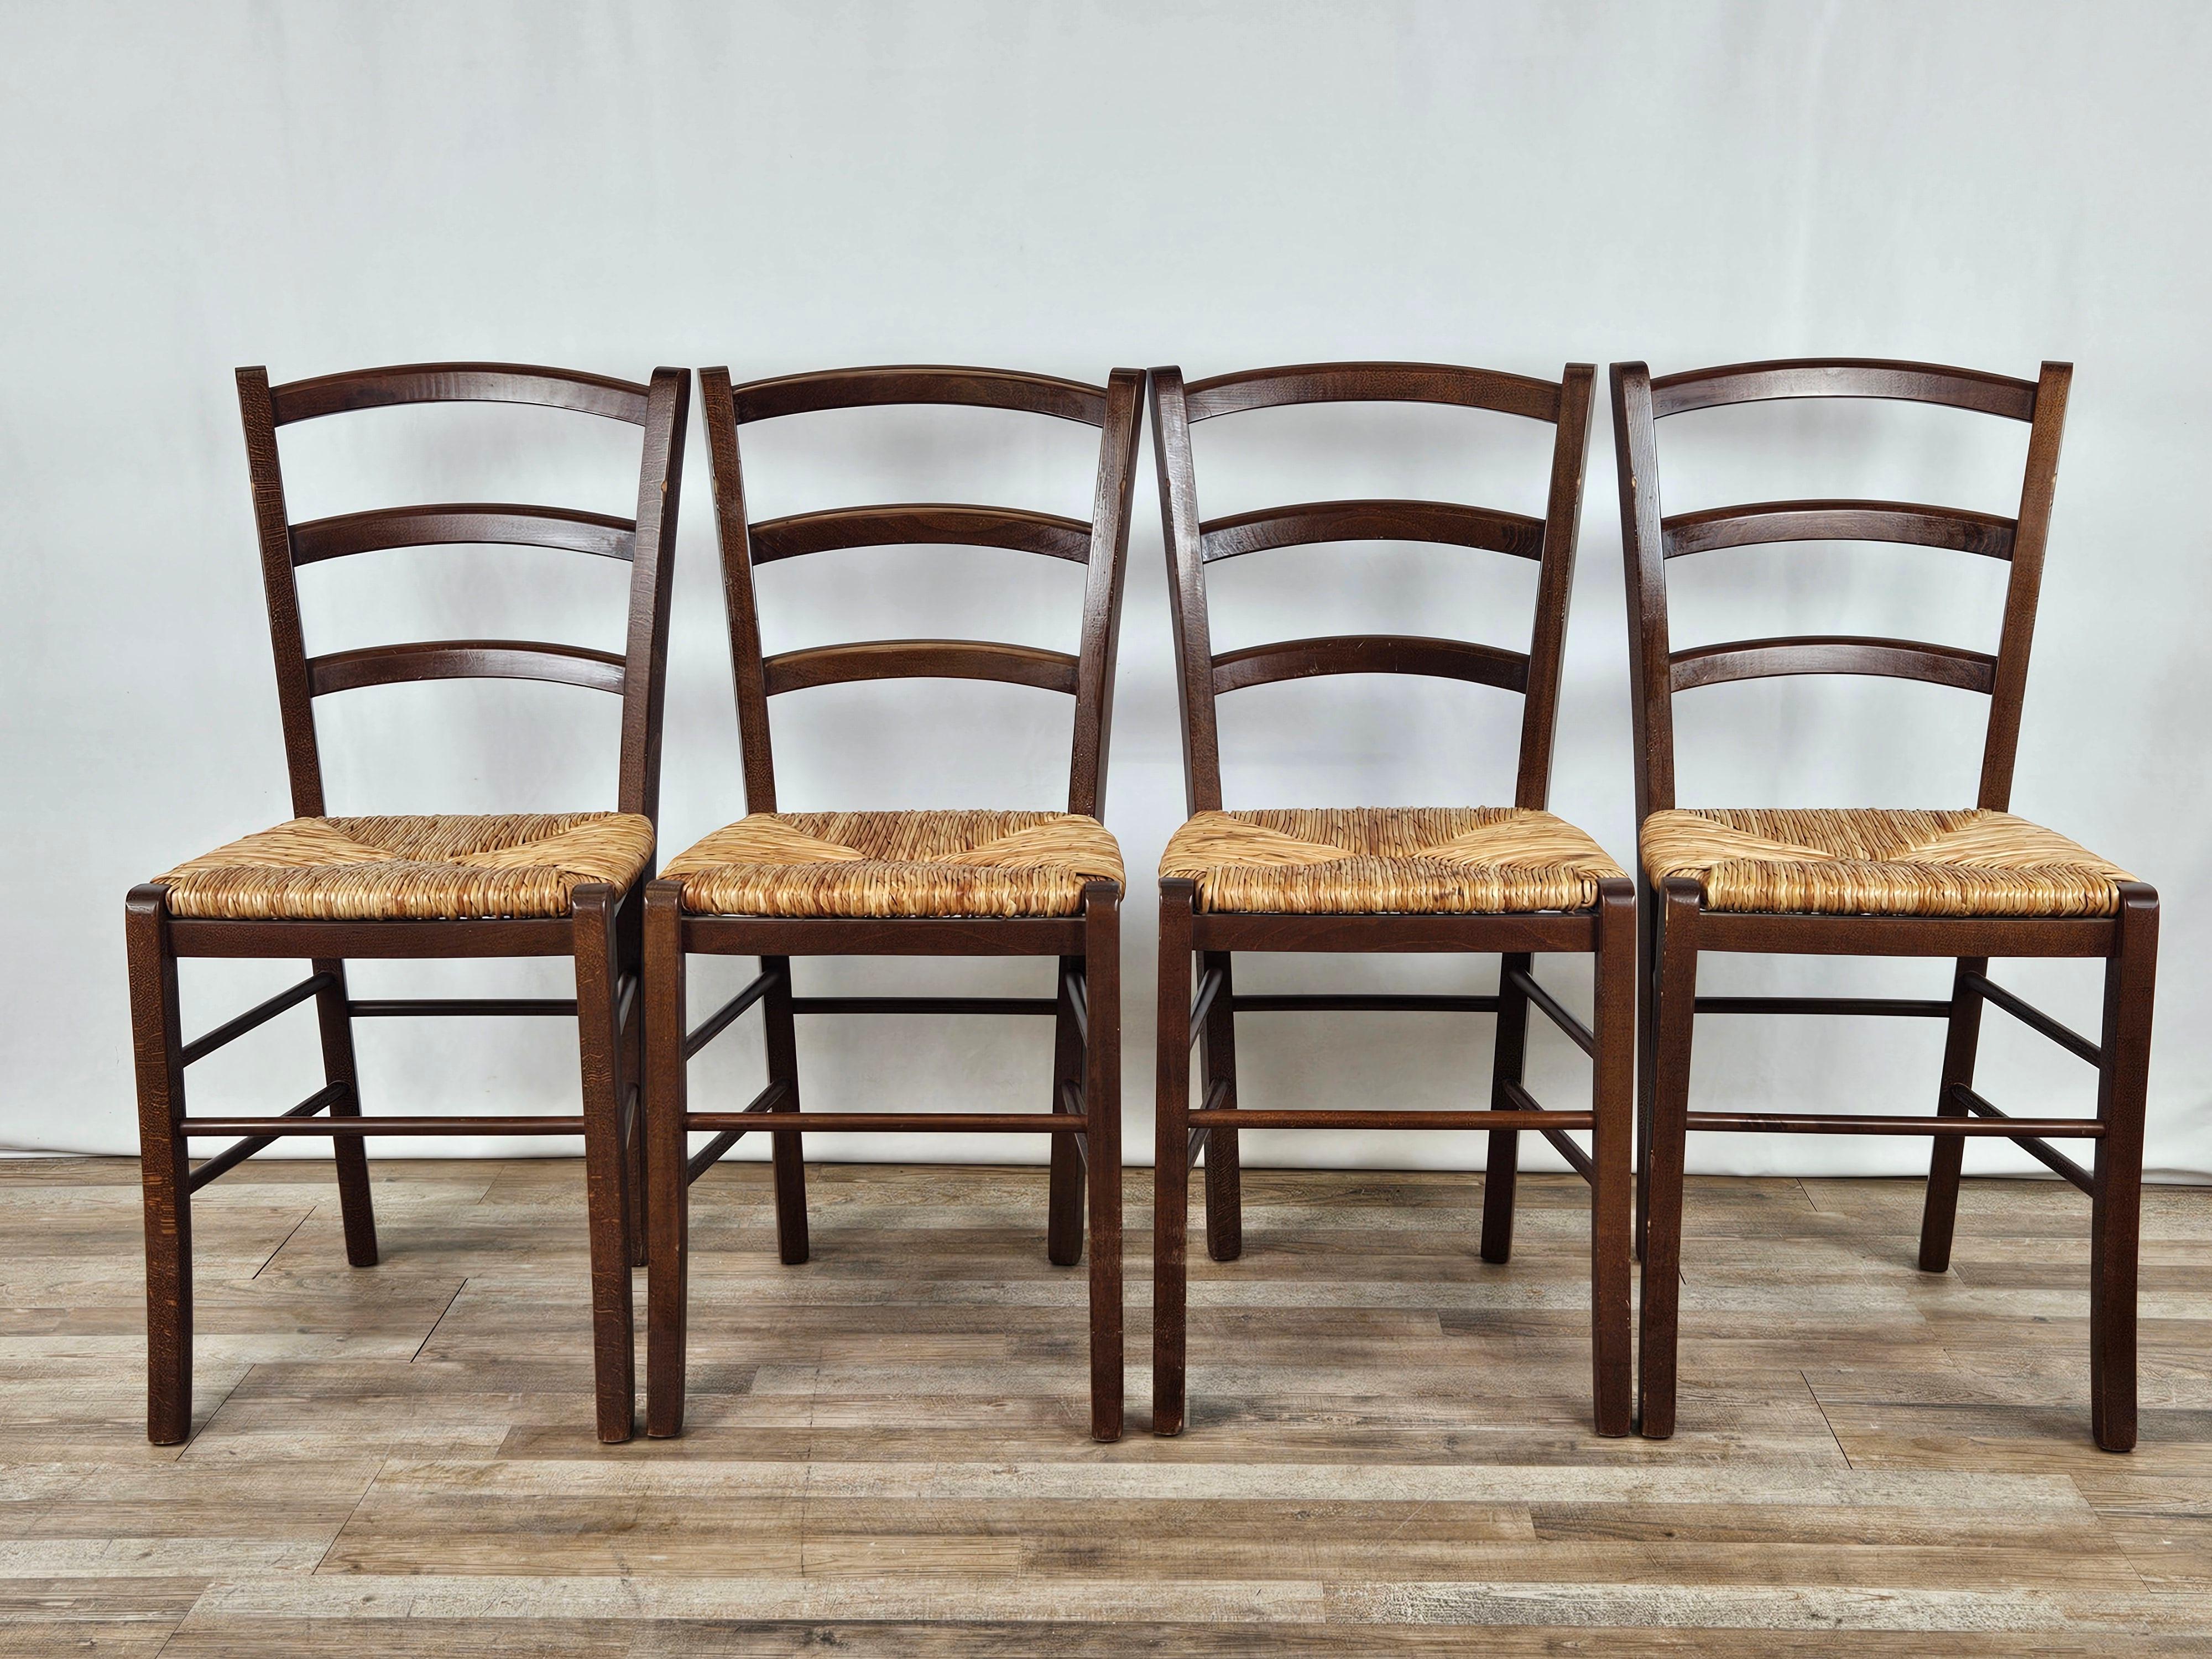 Country chairs conceived and designed for taverns, clubs, country houses and rustic settings.

The frame is made entirely of wood, and the seats are made of woven straw.

Normal signs of wear due to age and use.